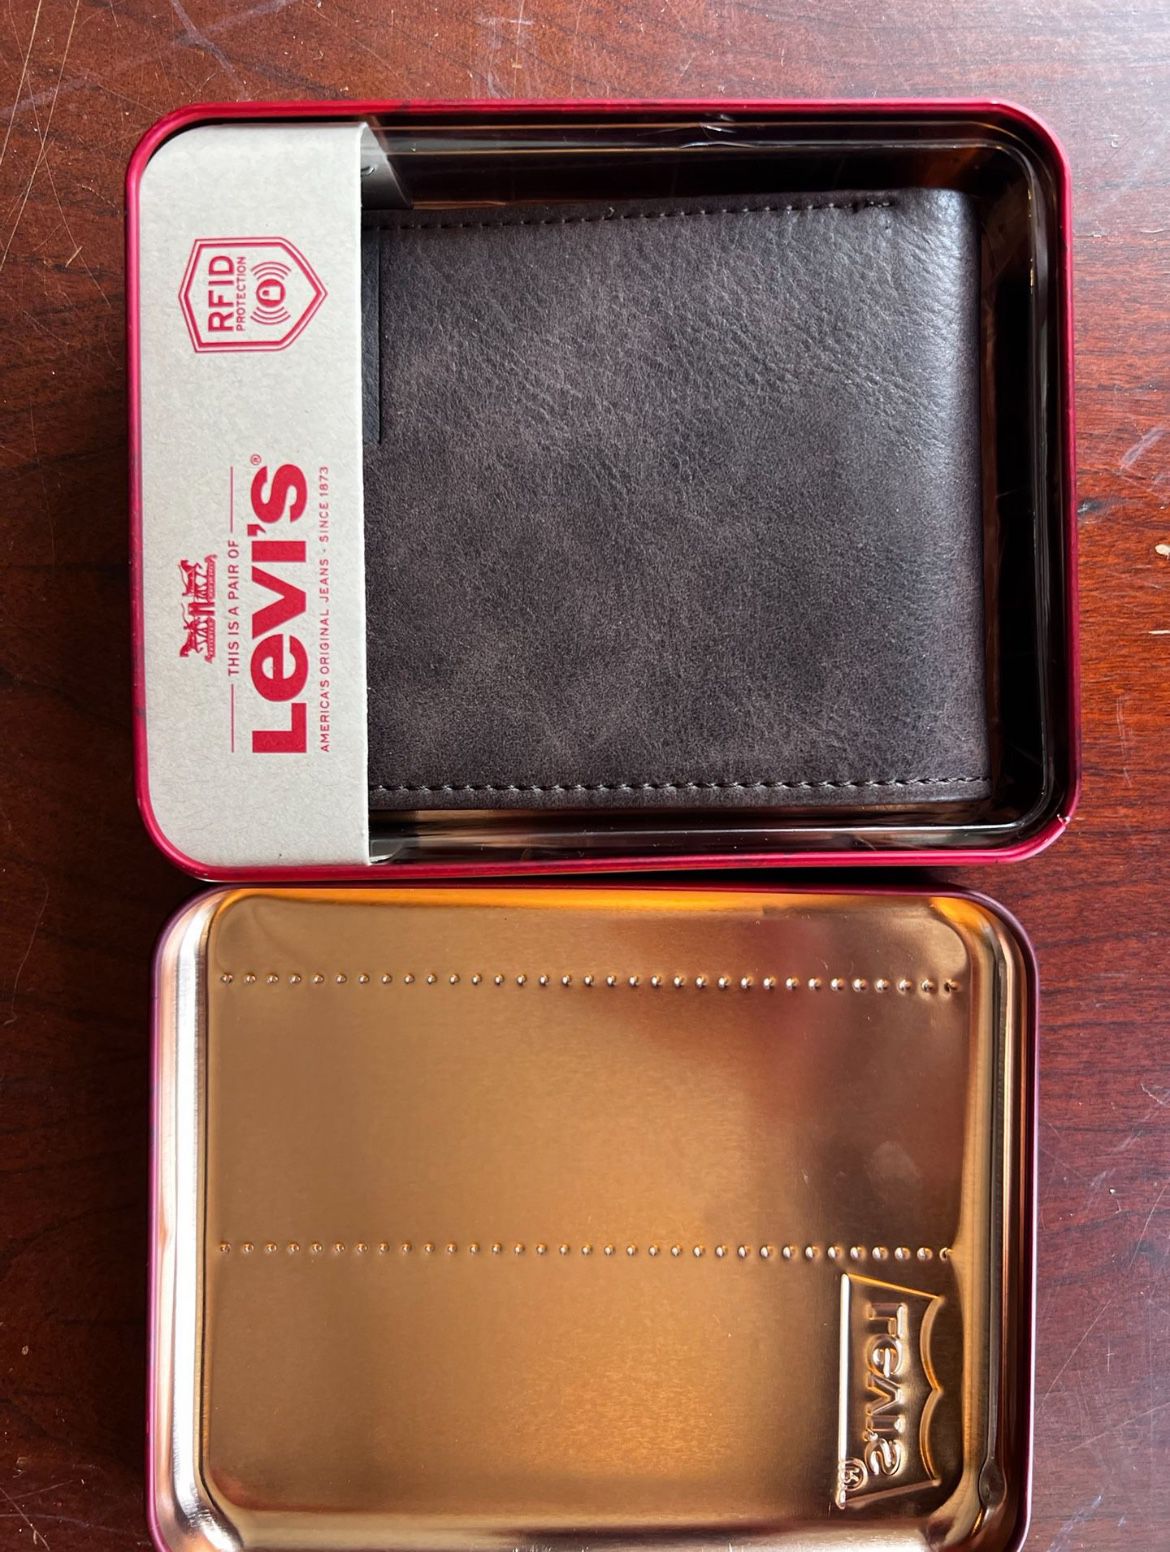 Levi's Wallet With Tin